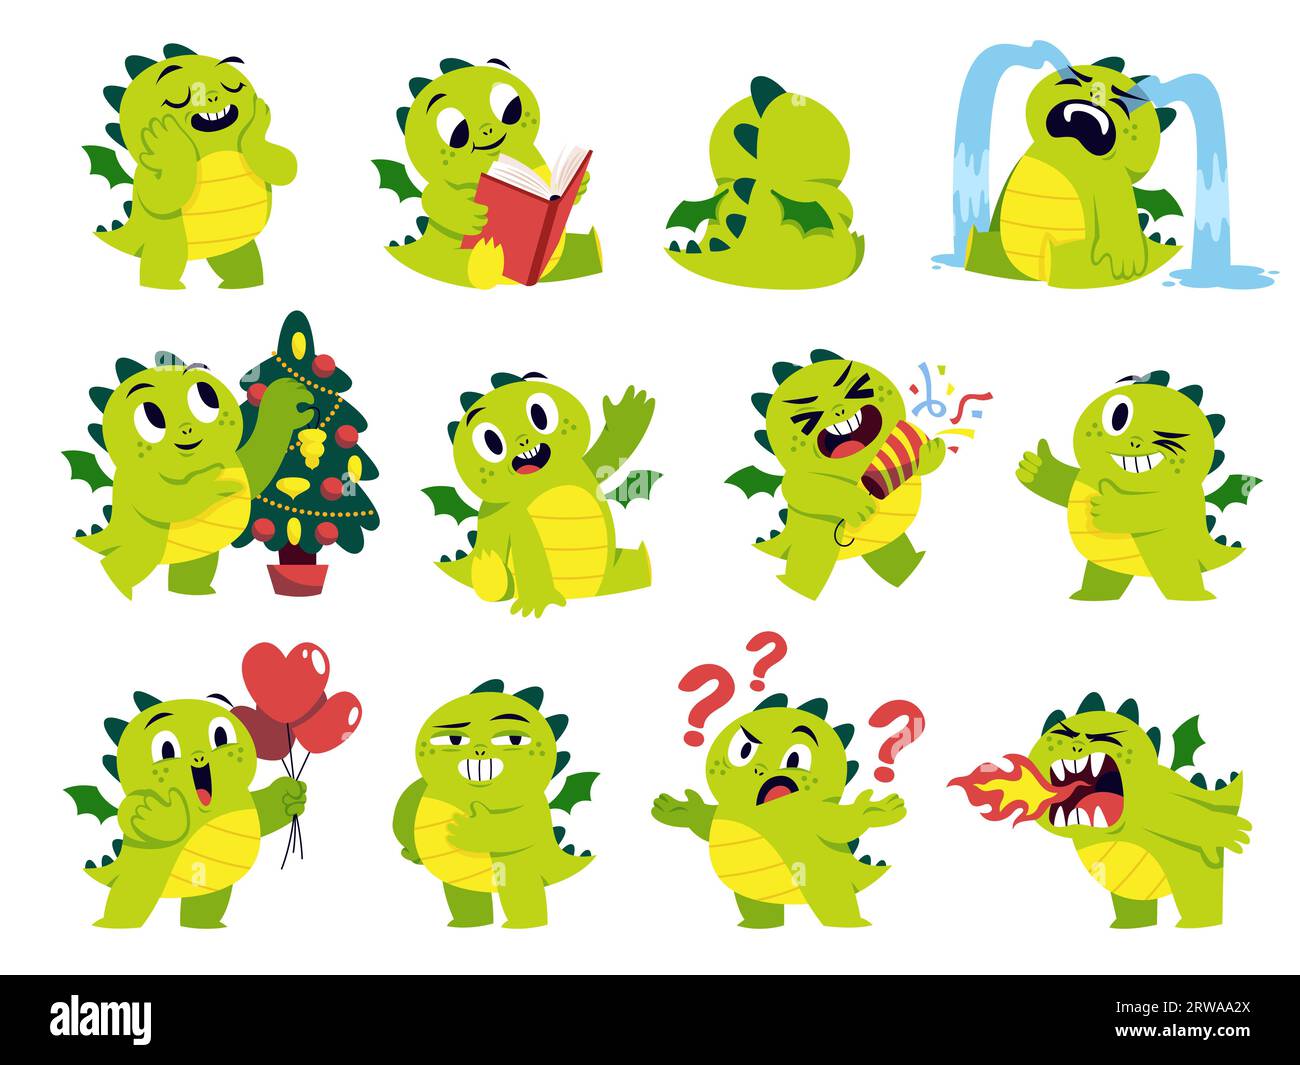 Baby funny dragon character. Cartoon dino mascot, different activities and emotions, cute fairytale animal, new year symbol, chinese mythology Stock Vector